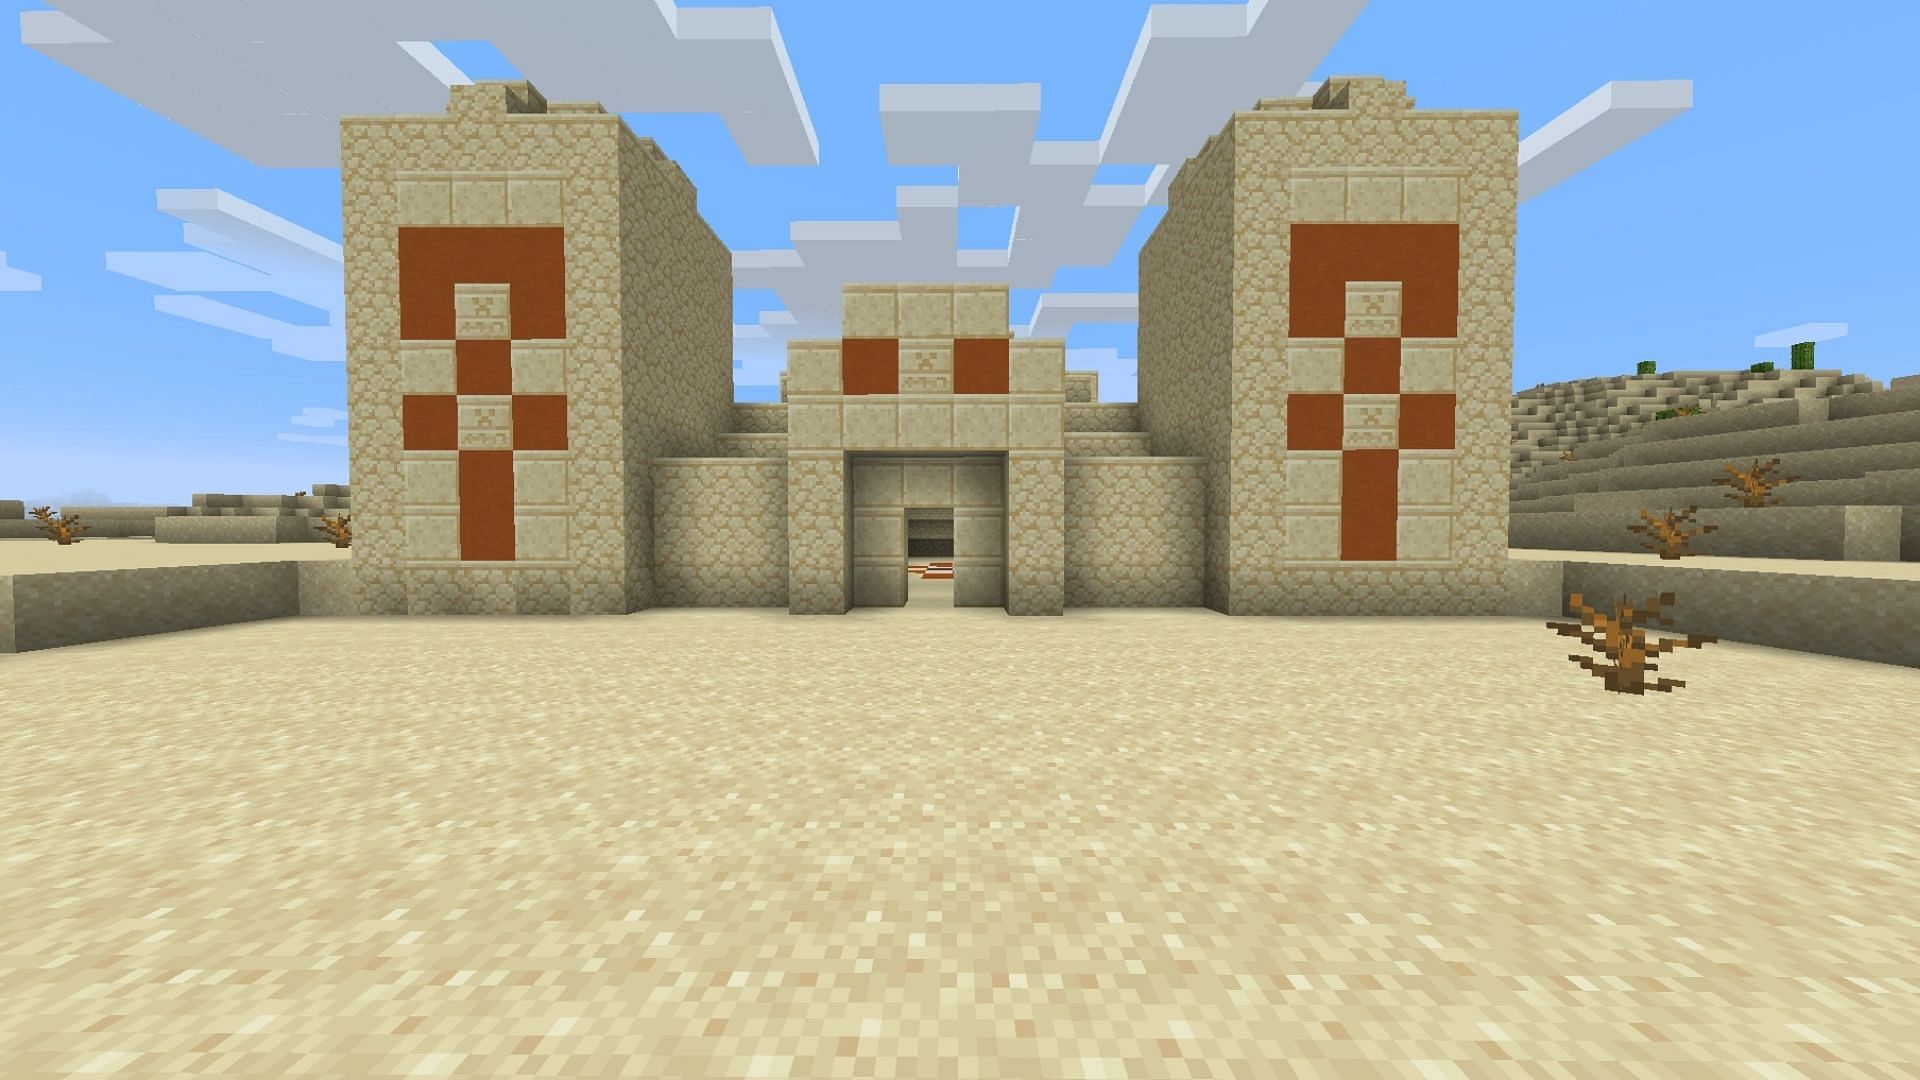 Desert temple will be the first excavation site where users will find new block to brush in Minecraft 1.20 update (Image via Mojang)